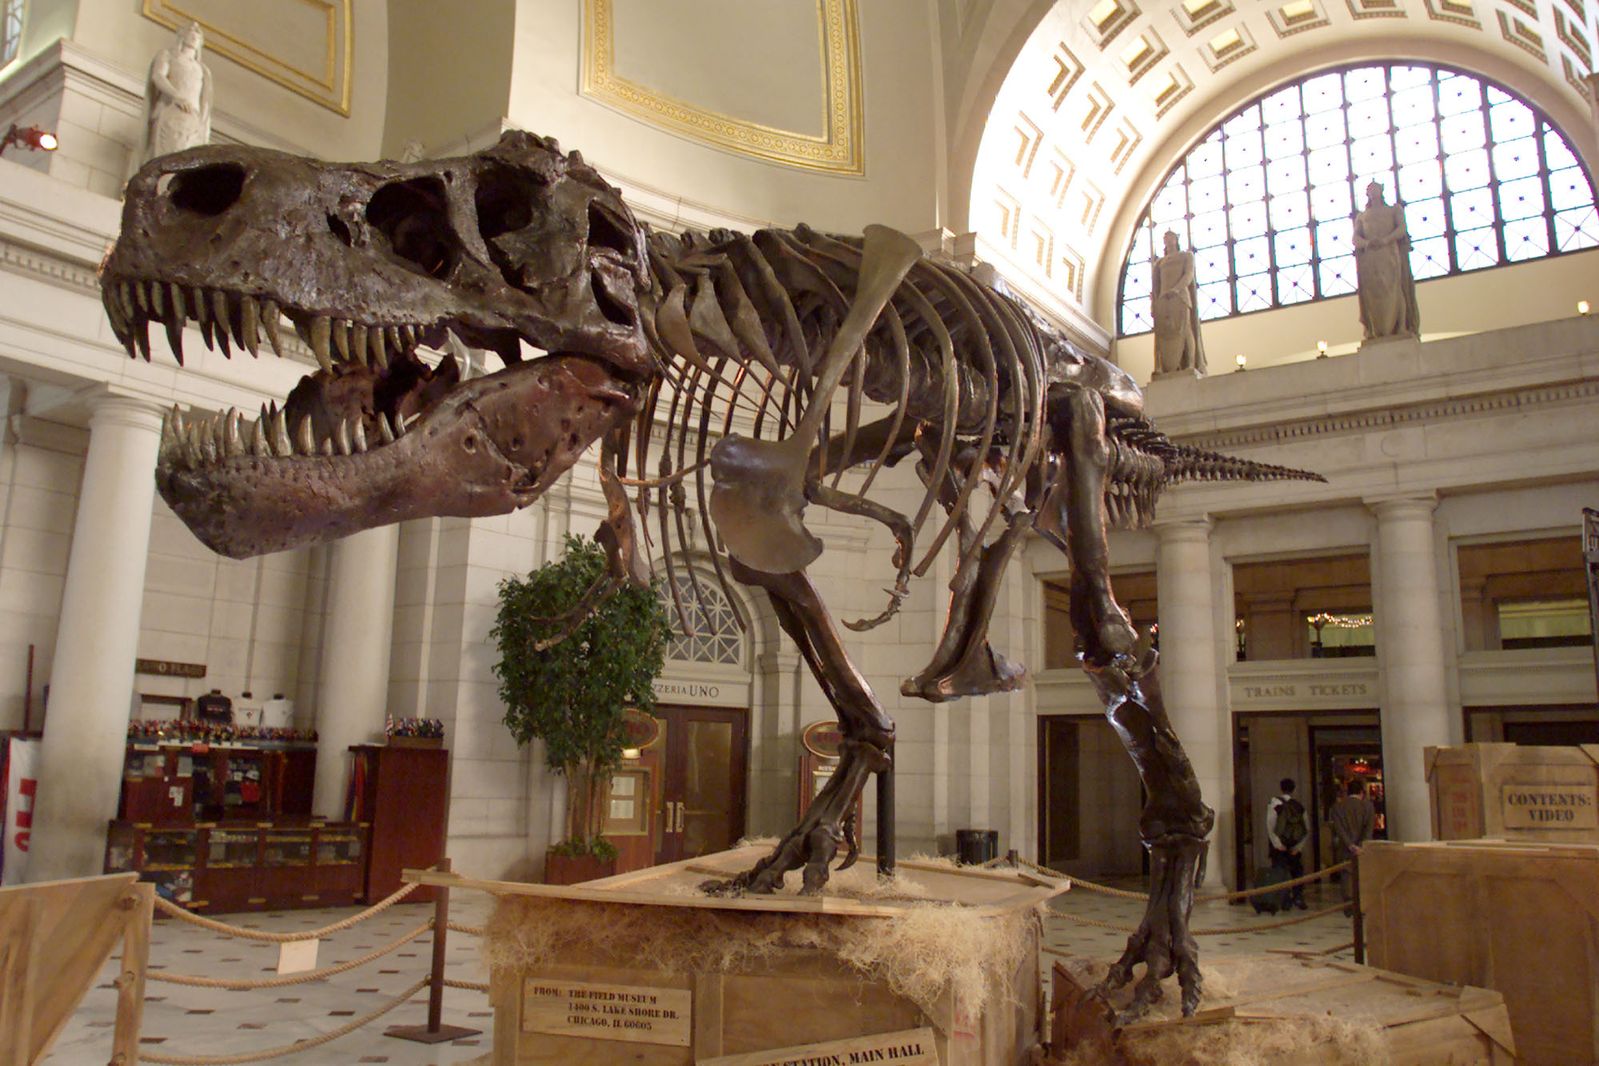 Scientists debunk bold theory of T. rex as 3 species